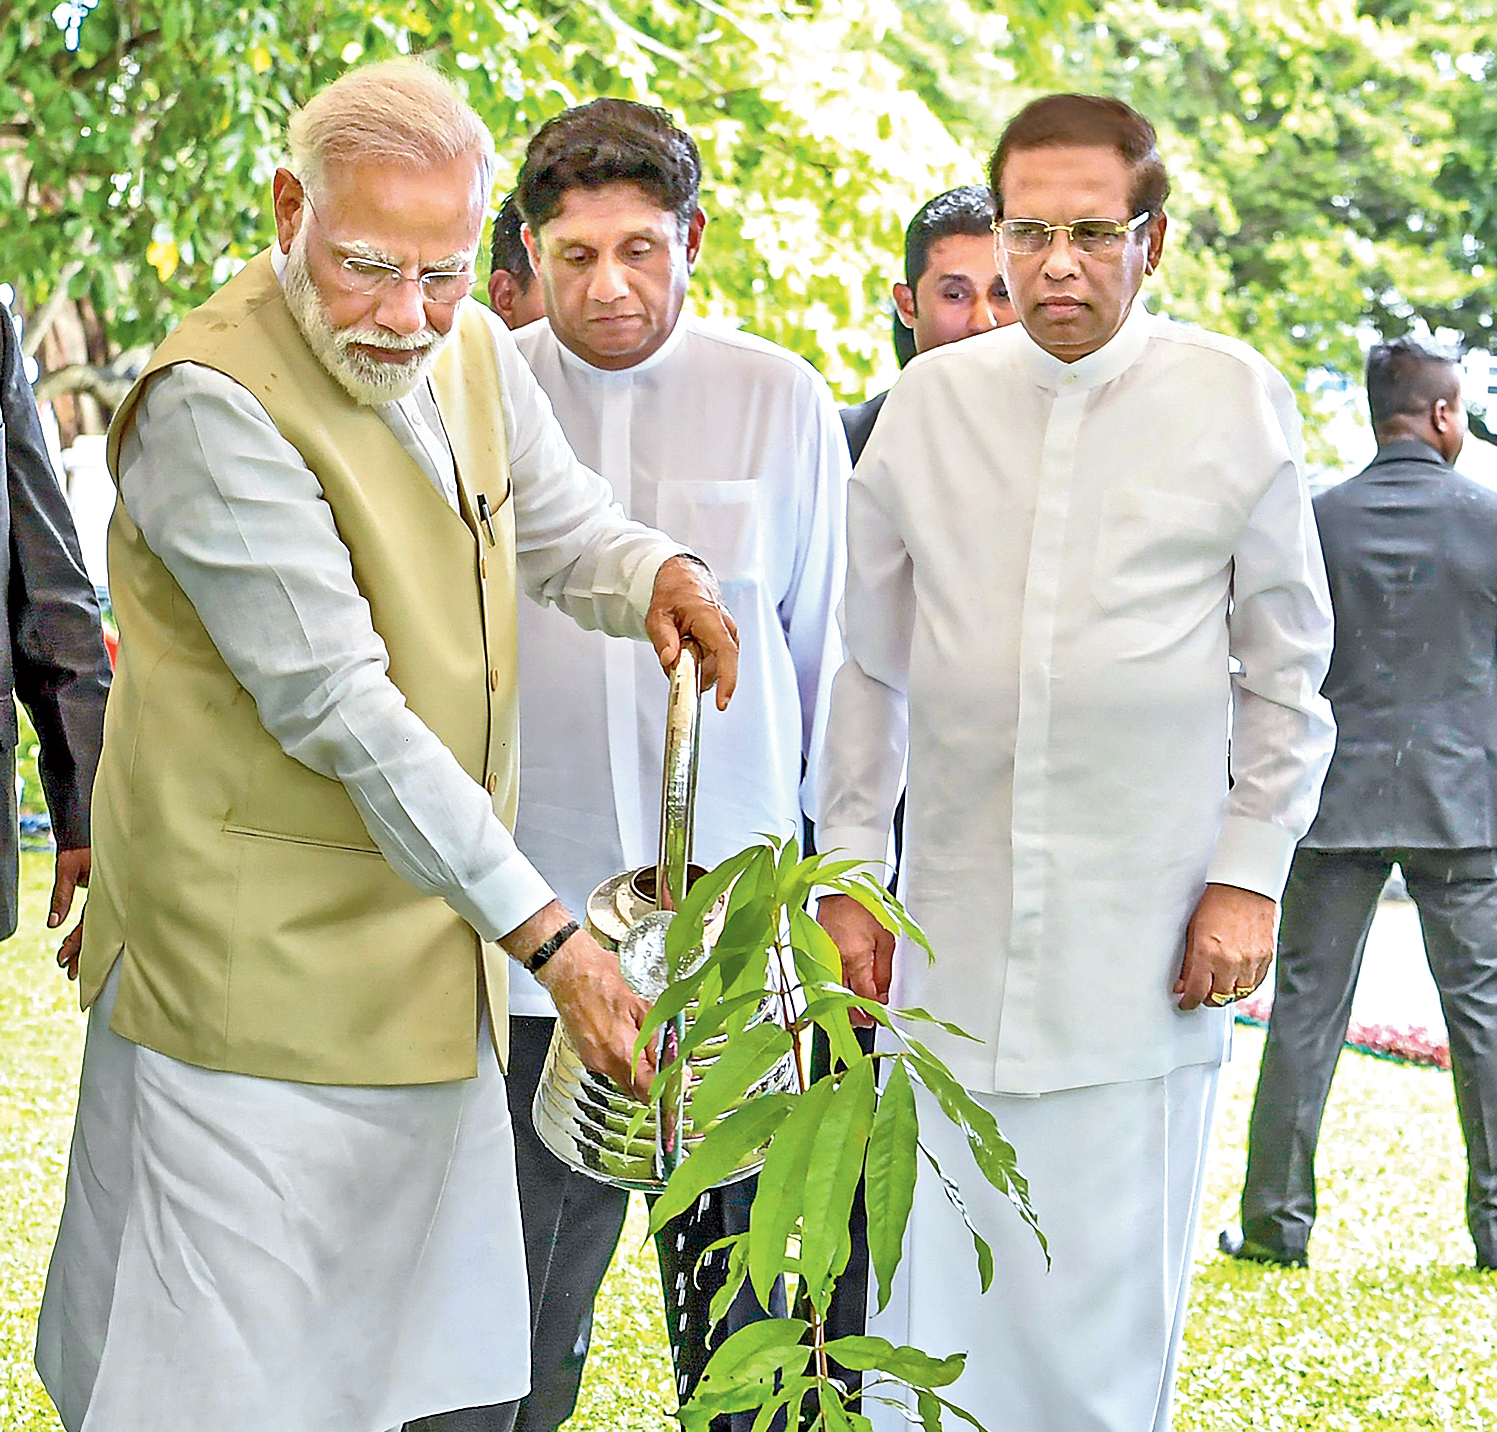 Prime Minister Narendra Modi plants an Ashoka tree at the President’s House in Colombo, Sri Lanka, on Sunday as President Maithripala Sirisena looks on. 
“Deep roots. Strong relationship…,” external affairs ministry spokesperson Raveesh Kumar tweeted. 
A plaque near the sapling read “Asoka Saraca asoca”. 
In the Ramayana, Sita was held captive in an Ashoka garden in Lanka after she was abducted by Ravan. Sita chose to stay under an Ashoka tree, where Hanuman met her for the first time.